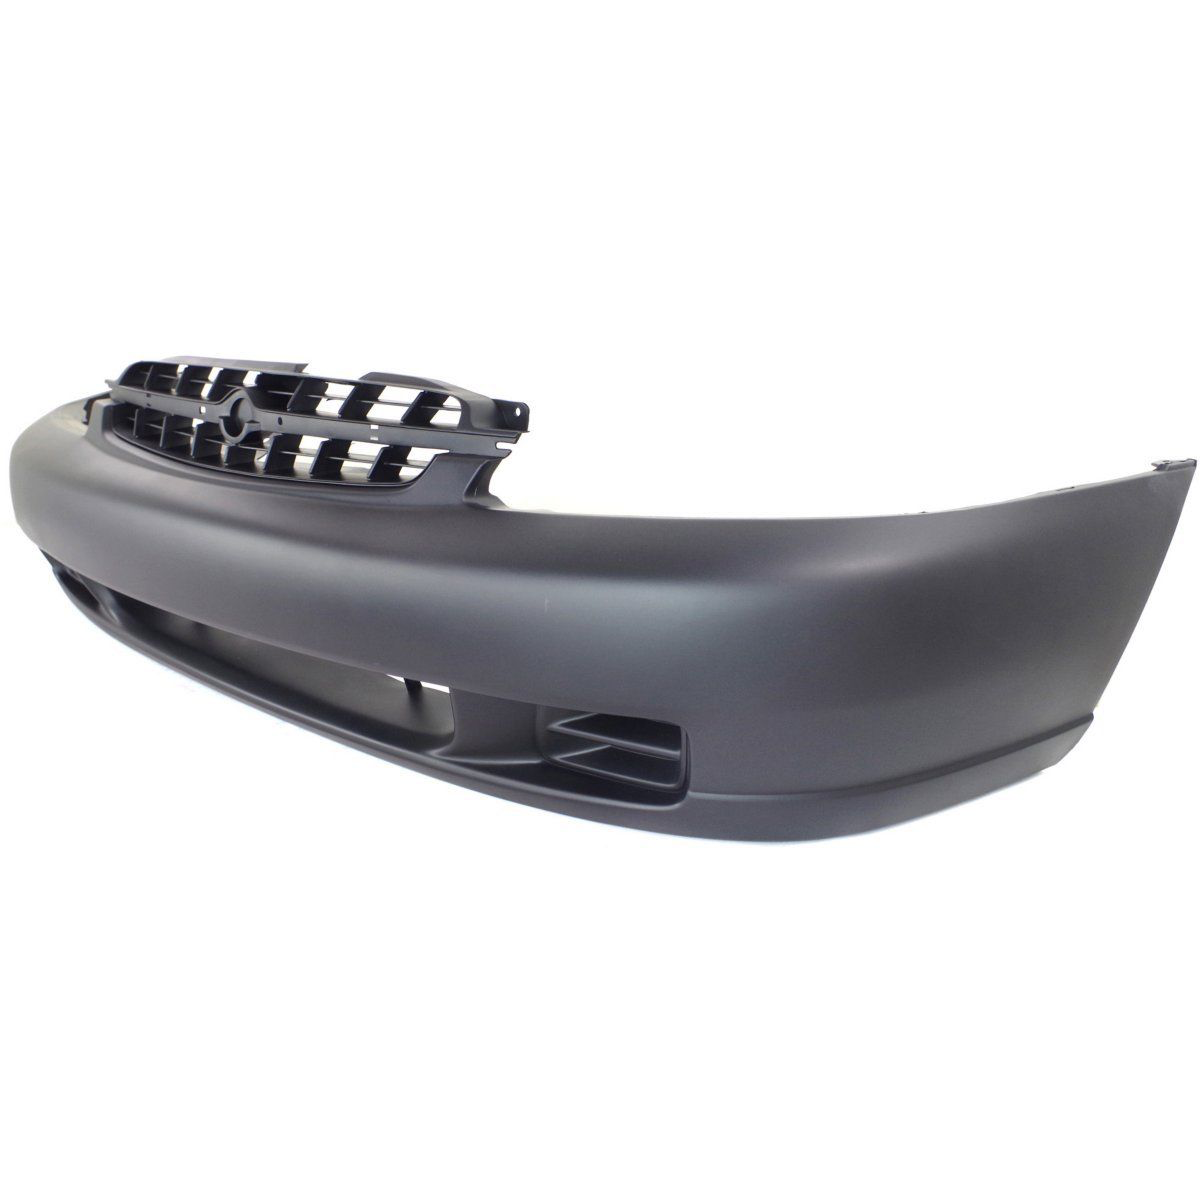 1998-1999 NISSAN ALTIMA Front Bumper Cover XE/GXE/GLE  w/o Fog Lamps Painted to Match